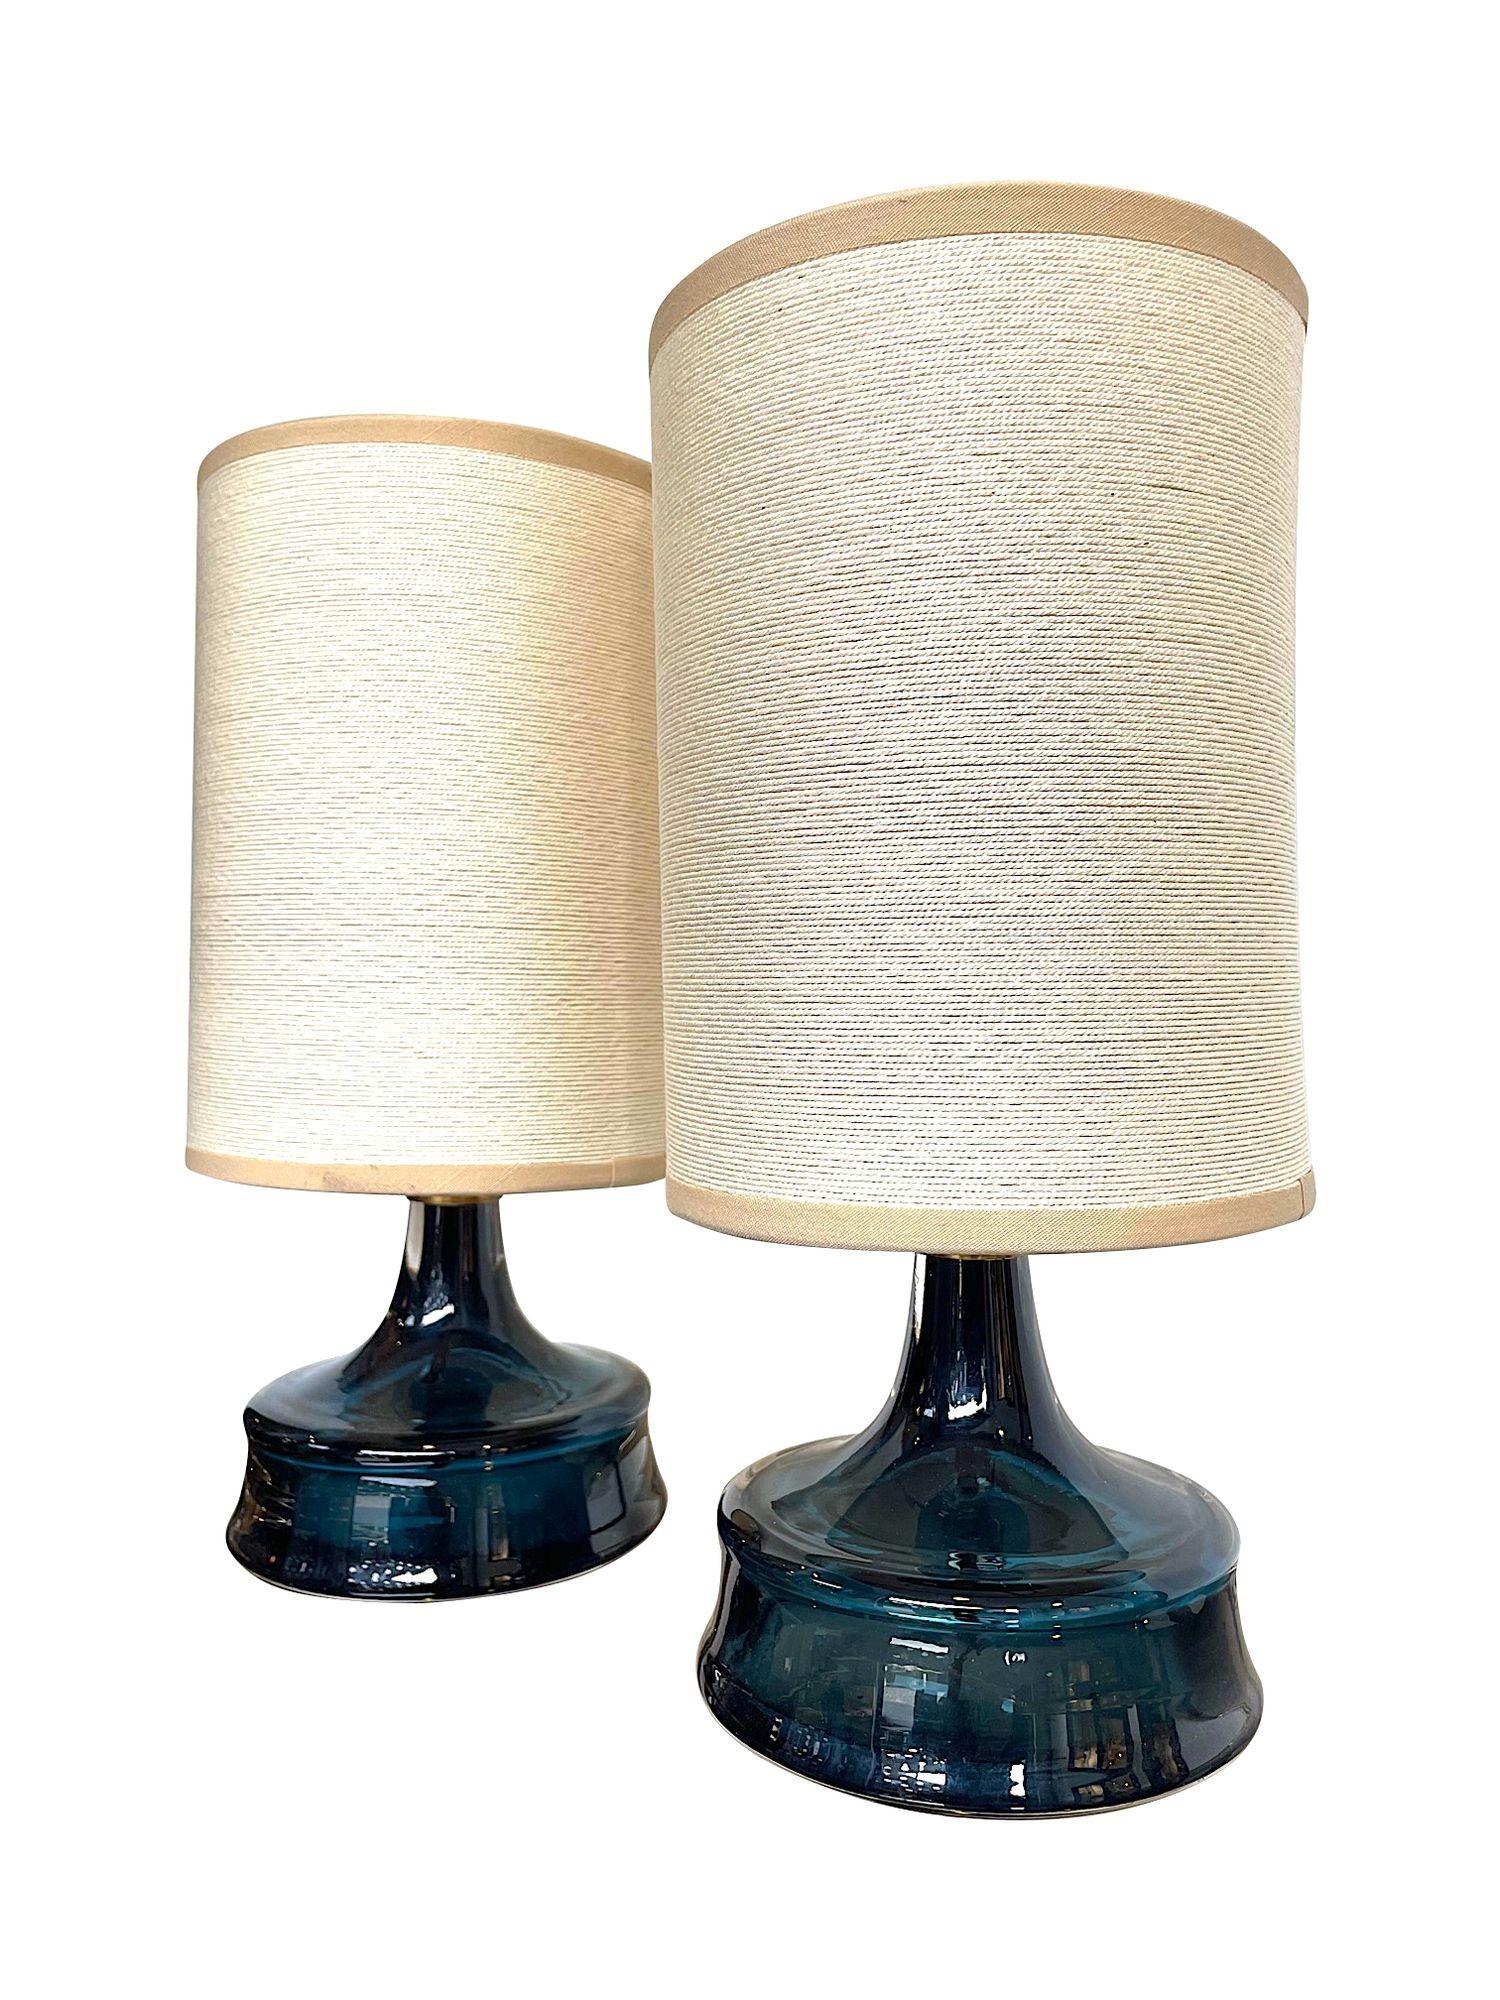 Mid-20th Century Pair of 1960s Swedish Orrefors Blue Glass Lamps with Brass Collars